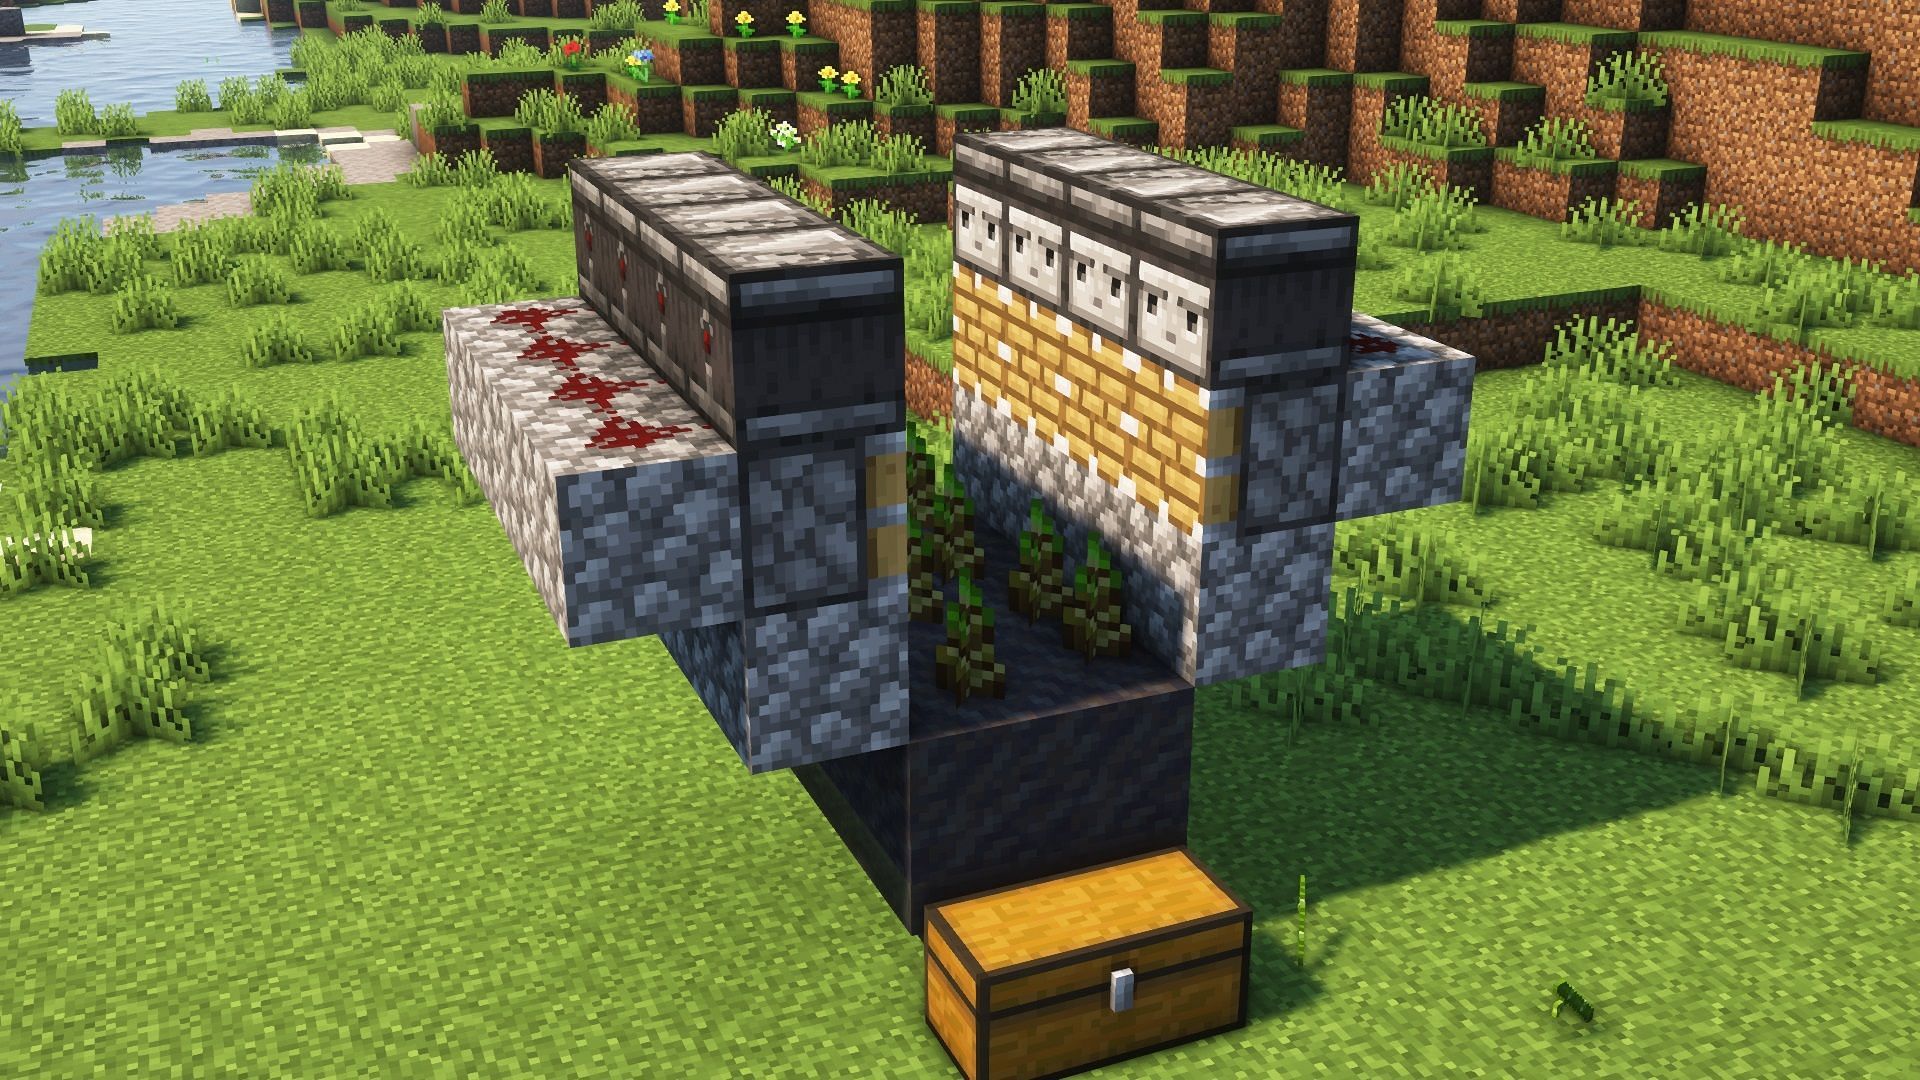 Observers are powered by Redstone (Image via Mojang)